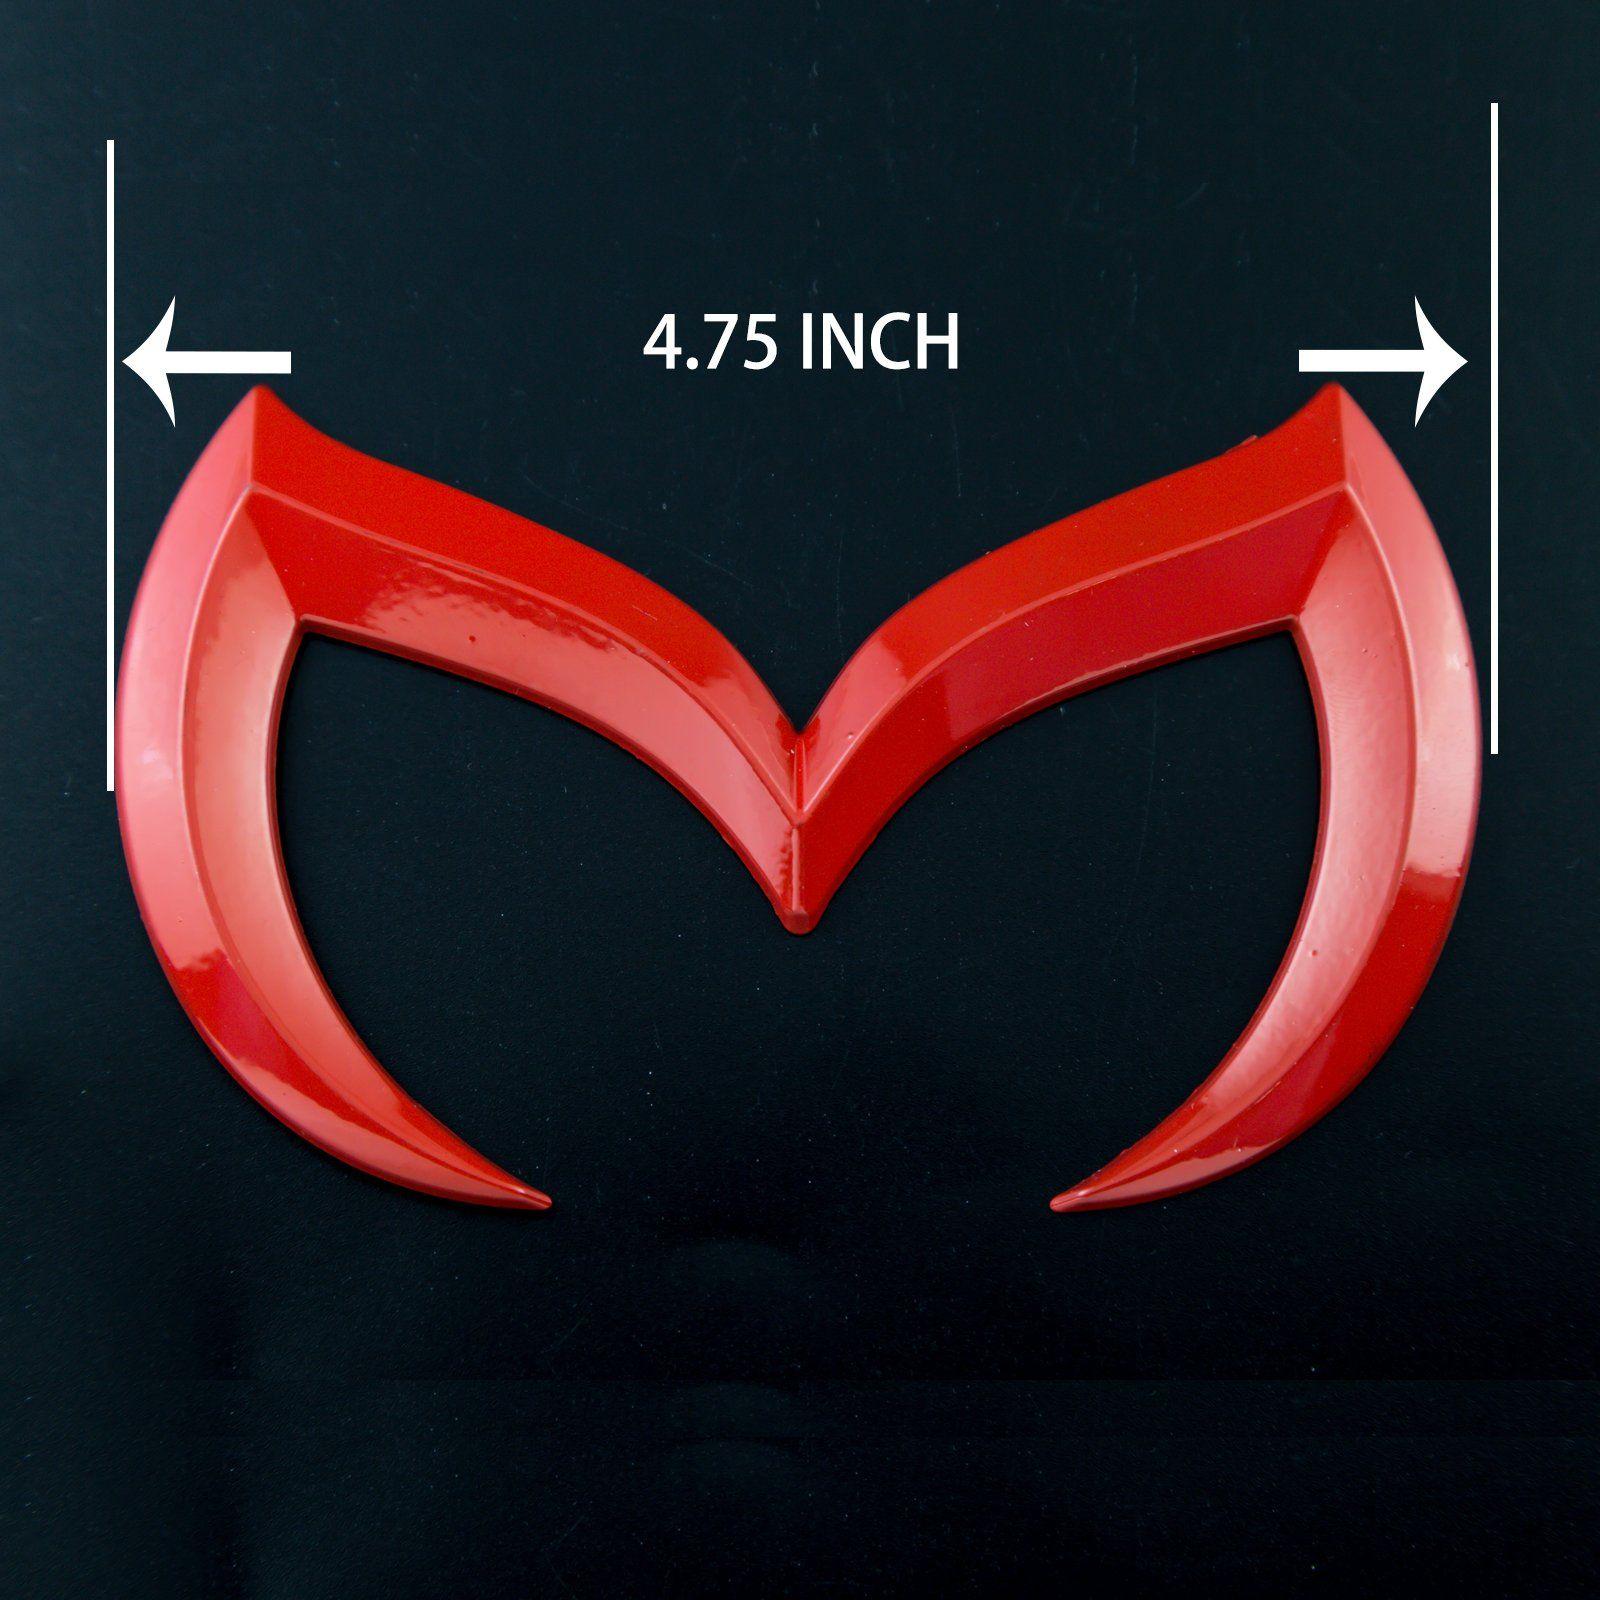 Gold and Red M Logo - Evil M Emblem Logo Badge Decal for Mazda3 6 Mazdaspeed CX 3 5 MX-5 ...